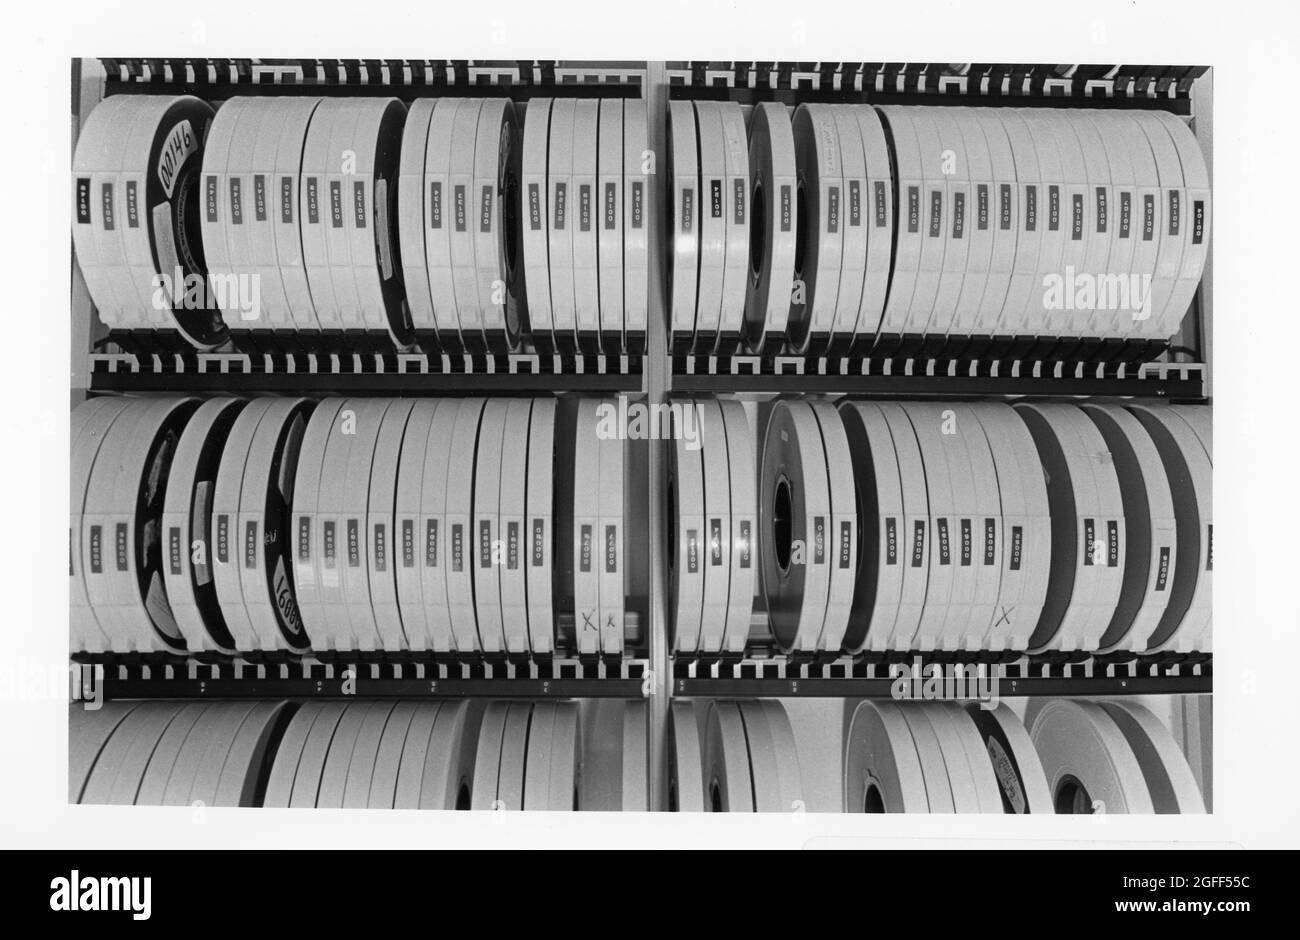 Austin Texas USA, 1990:Racks of magnetic tapes store data entered into computer system to compile data for the United States Census regional data processing center. ©Bob Daemmrich Stock Photo